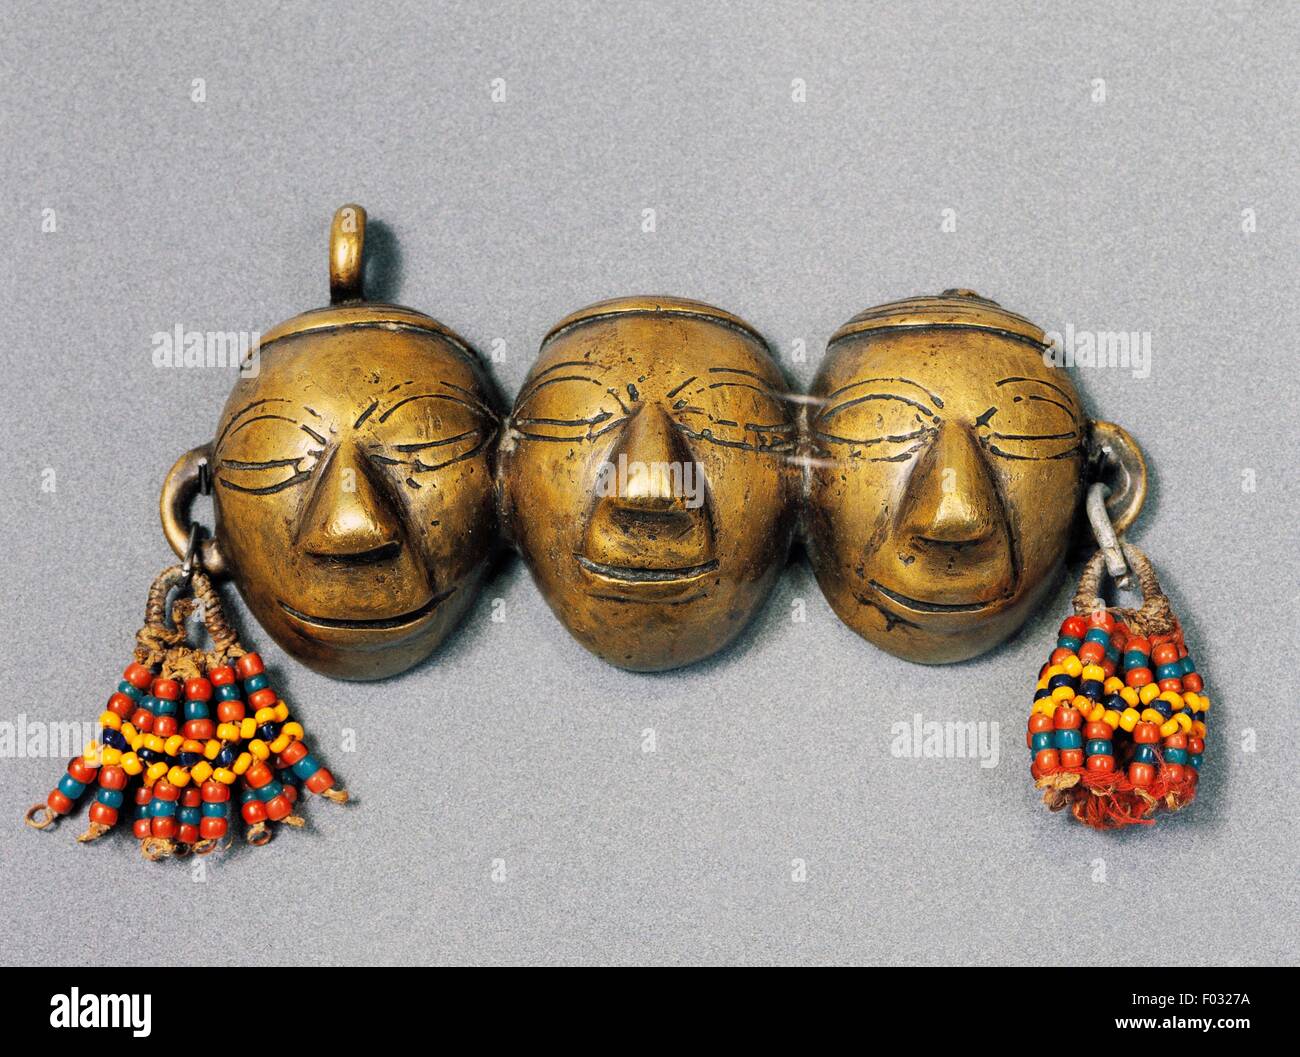 Men's necklace with pendants depicting faces and decorated with colored beads worn by headhunters, Konyak and Wancho, Nagaland, India. Stock Photo